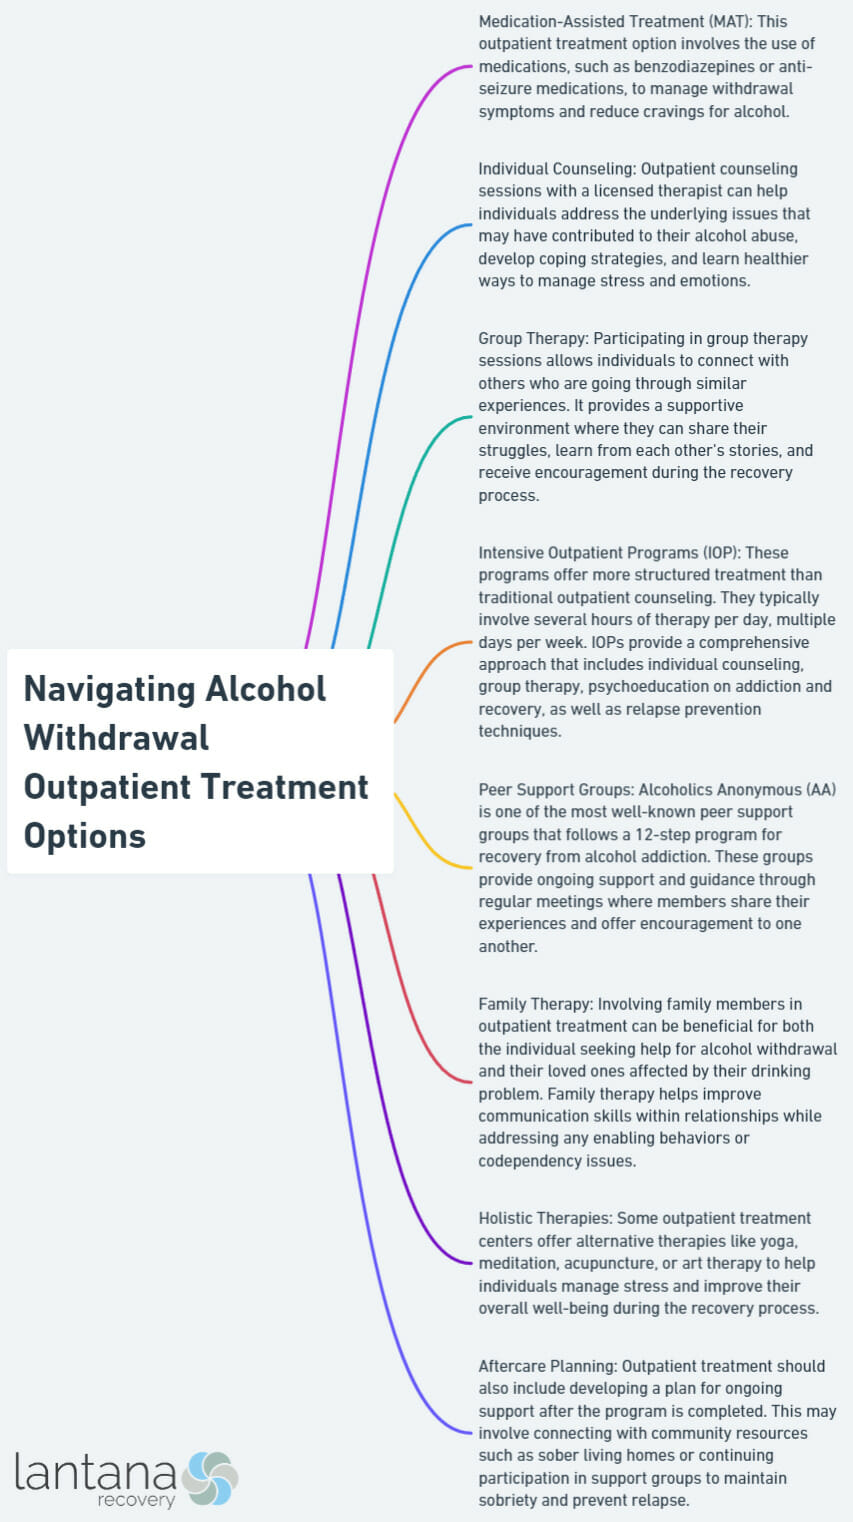 Navigating Alcohol Withdrawal Outpatient Treatment Options
